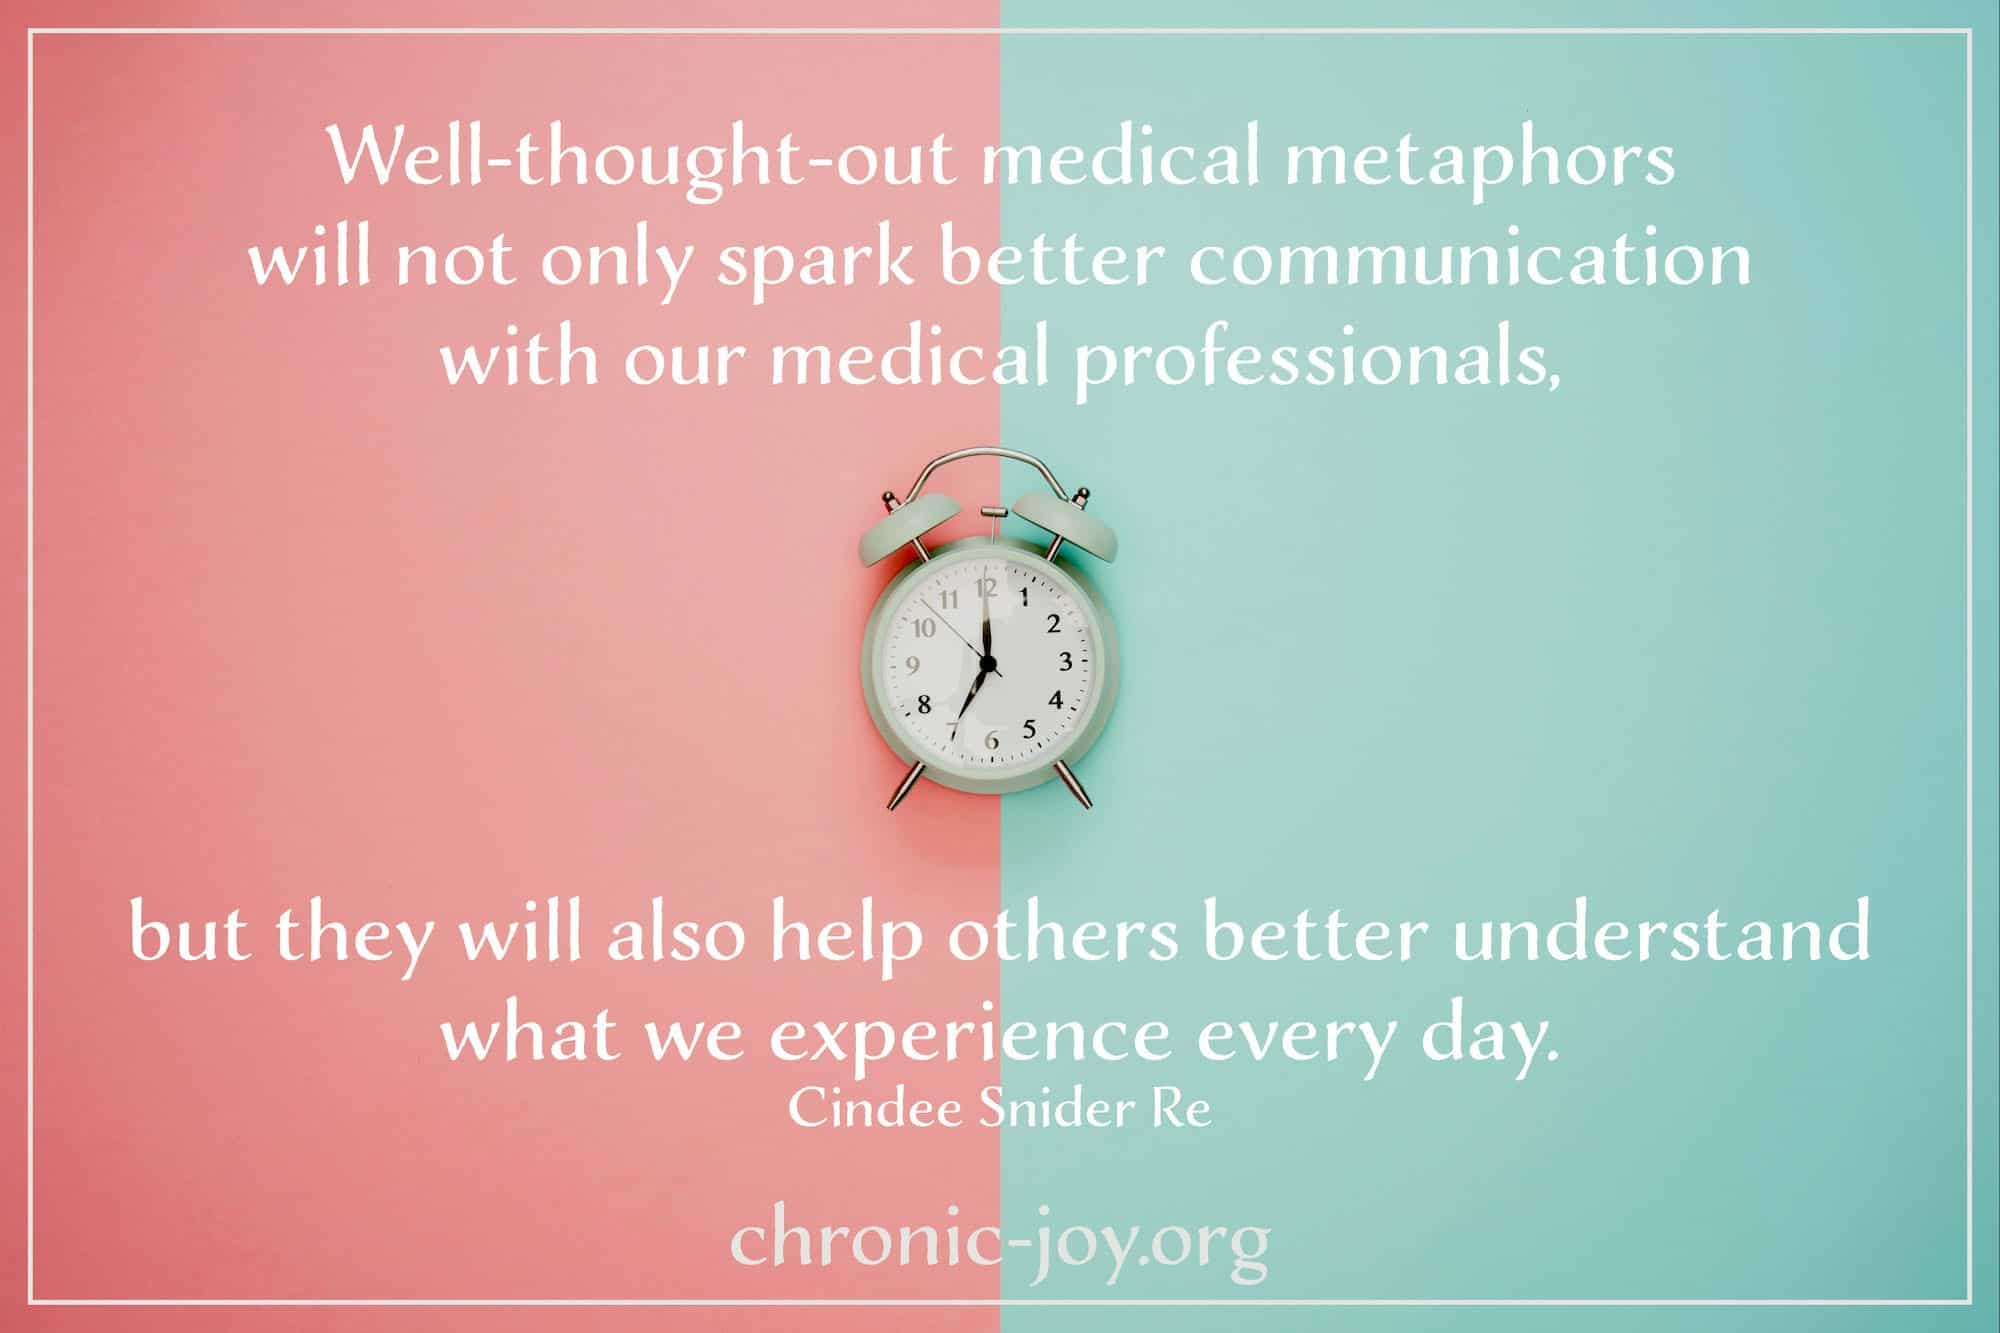 "Well-thought-out medical metaphors will not only spark better communication with our medical professionals, but they will also help others better understand what we experience every day." Cindee Snider Re